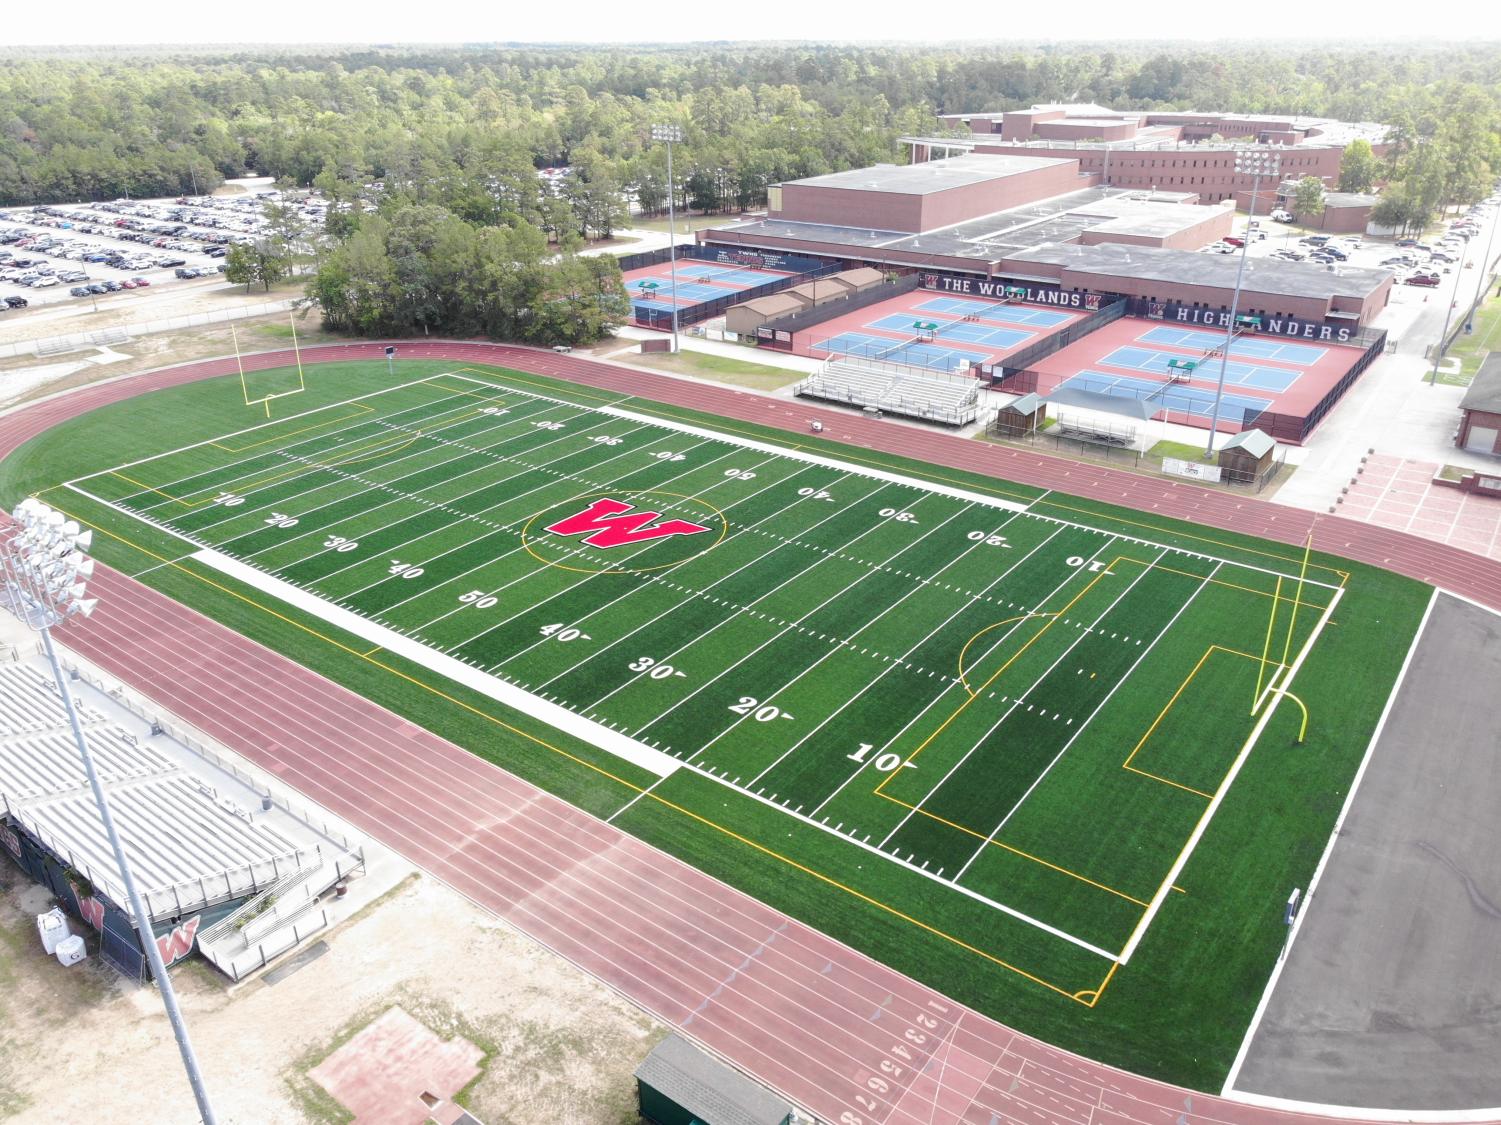 A drone operated by AFJROTC took this photo of the updated Willig Field last month.  